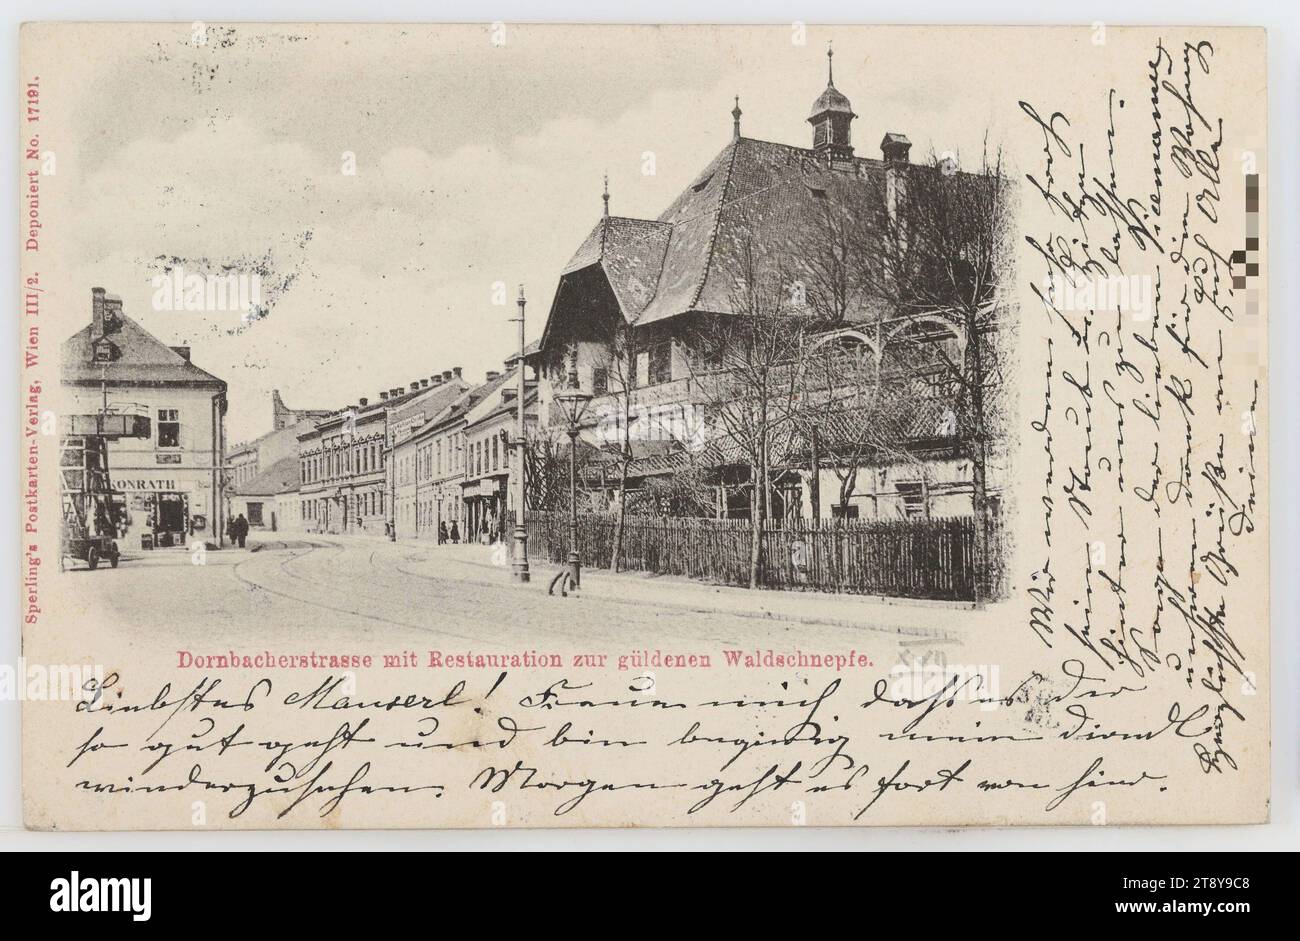 17th, Dornbach - Dornbacher Straße - with restaurant 'Zur goldenen Waldschnepfe', picture postcard, Sperlings Postkartenverlag (M. M. S.), manufacturer, 1904, cardboard, collotype, inscription, FROM, Vienna, TO, St. Agatha, ADDRESS, Miss, p. ad. Mr., St. Agatha, Post Au bei Goisern, MESSAGE, Dearest mouse! I am glad that you are doing so well and am eager to see my Dirndl again. Tomorrow we leave here, we will be very glad to leave dust and heat behind us. Tell the dear [...] our thanks for the apartment, Warmest greetings to you all, Yours, Hotel and restaurant industry Stock Photo